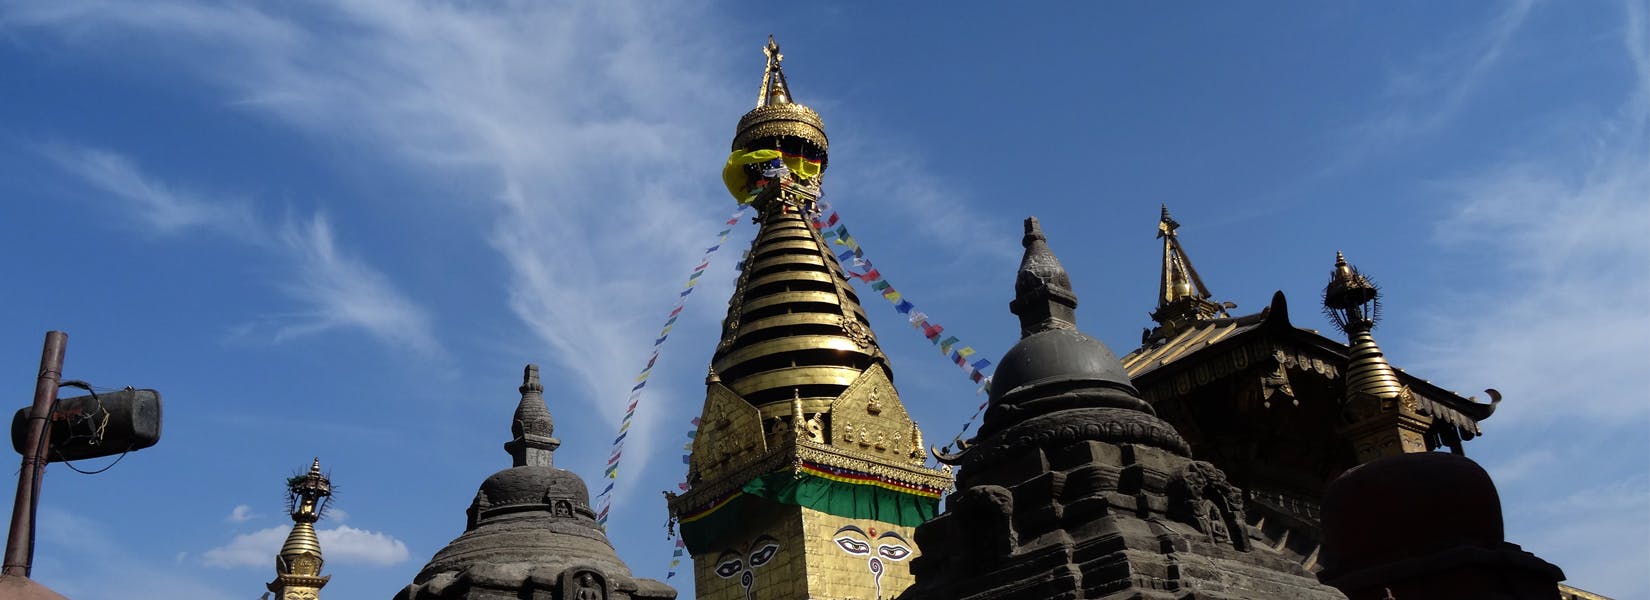 Buddhist Sites Tour in Nepal - <span class="font-light">7 days</span>